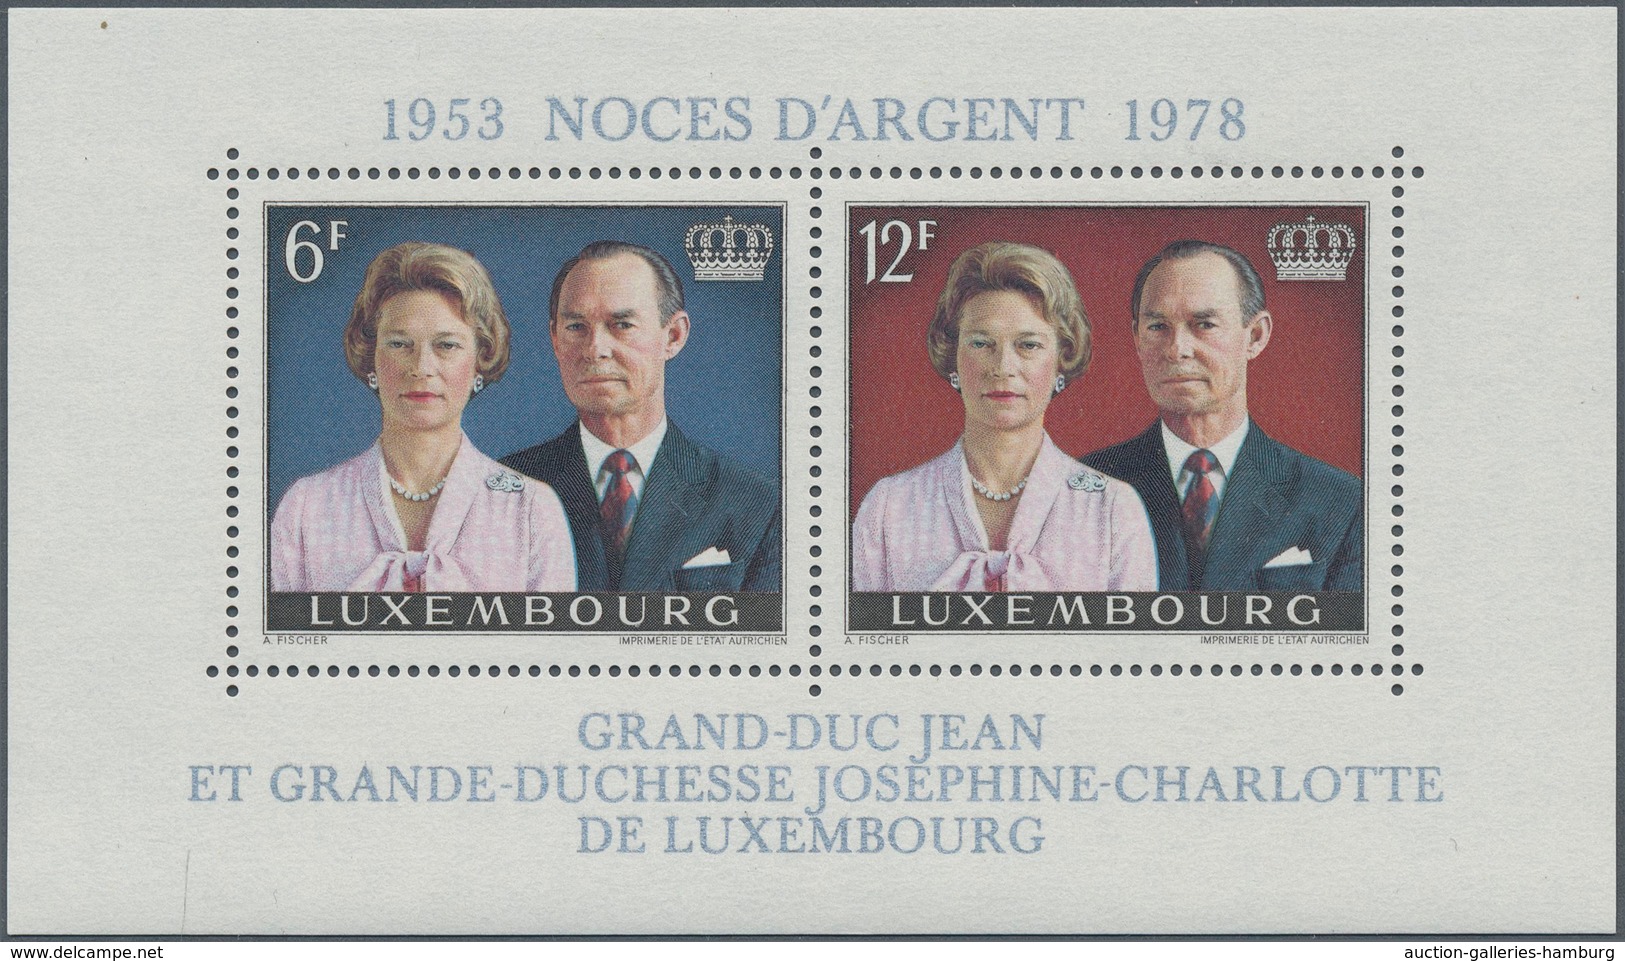 Luxemburg: 1939/1990, duplicated accumulation of the MINIATURE SHEETS in different quantities incl.